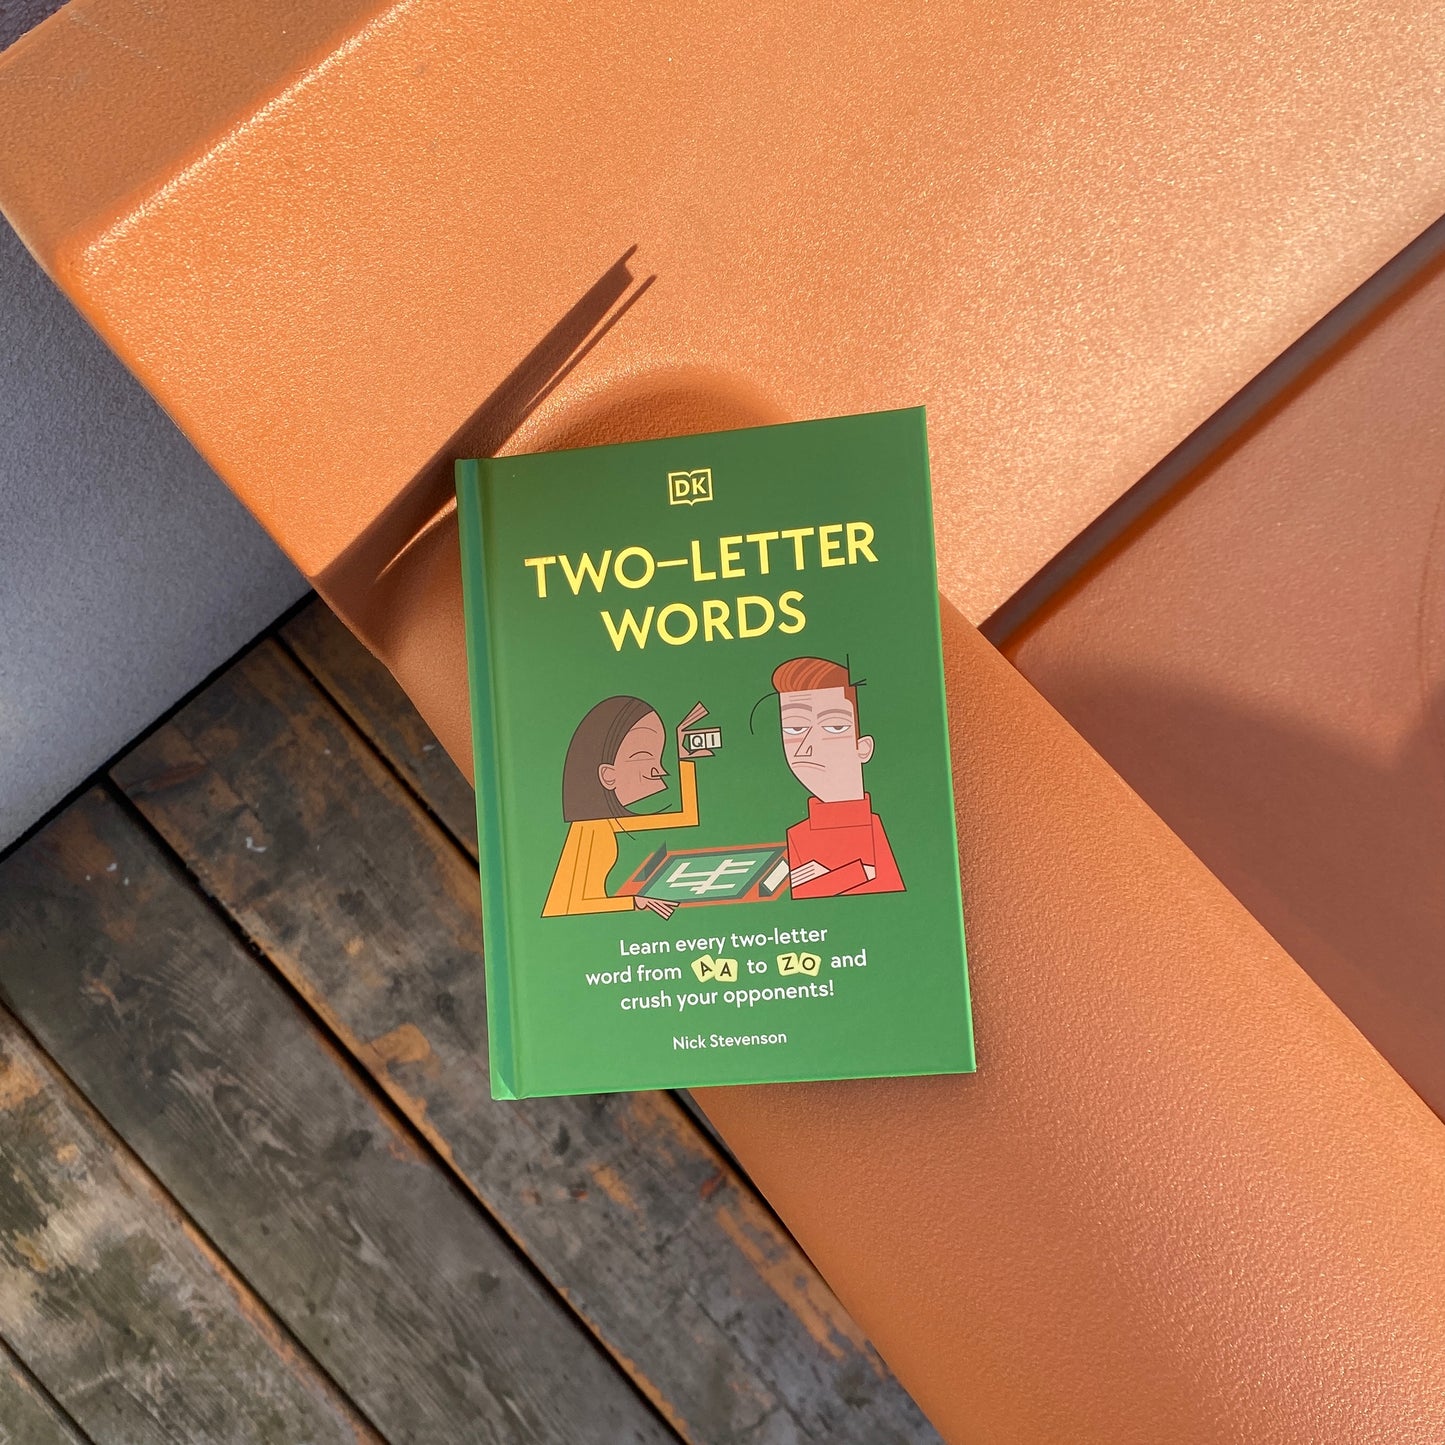 Two-Letter Words: Learn Every Two-letter Word From Aa to Zo and Crush Your Opponents!